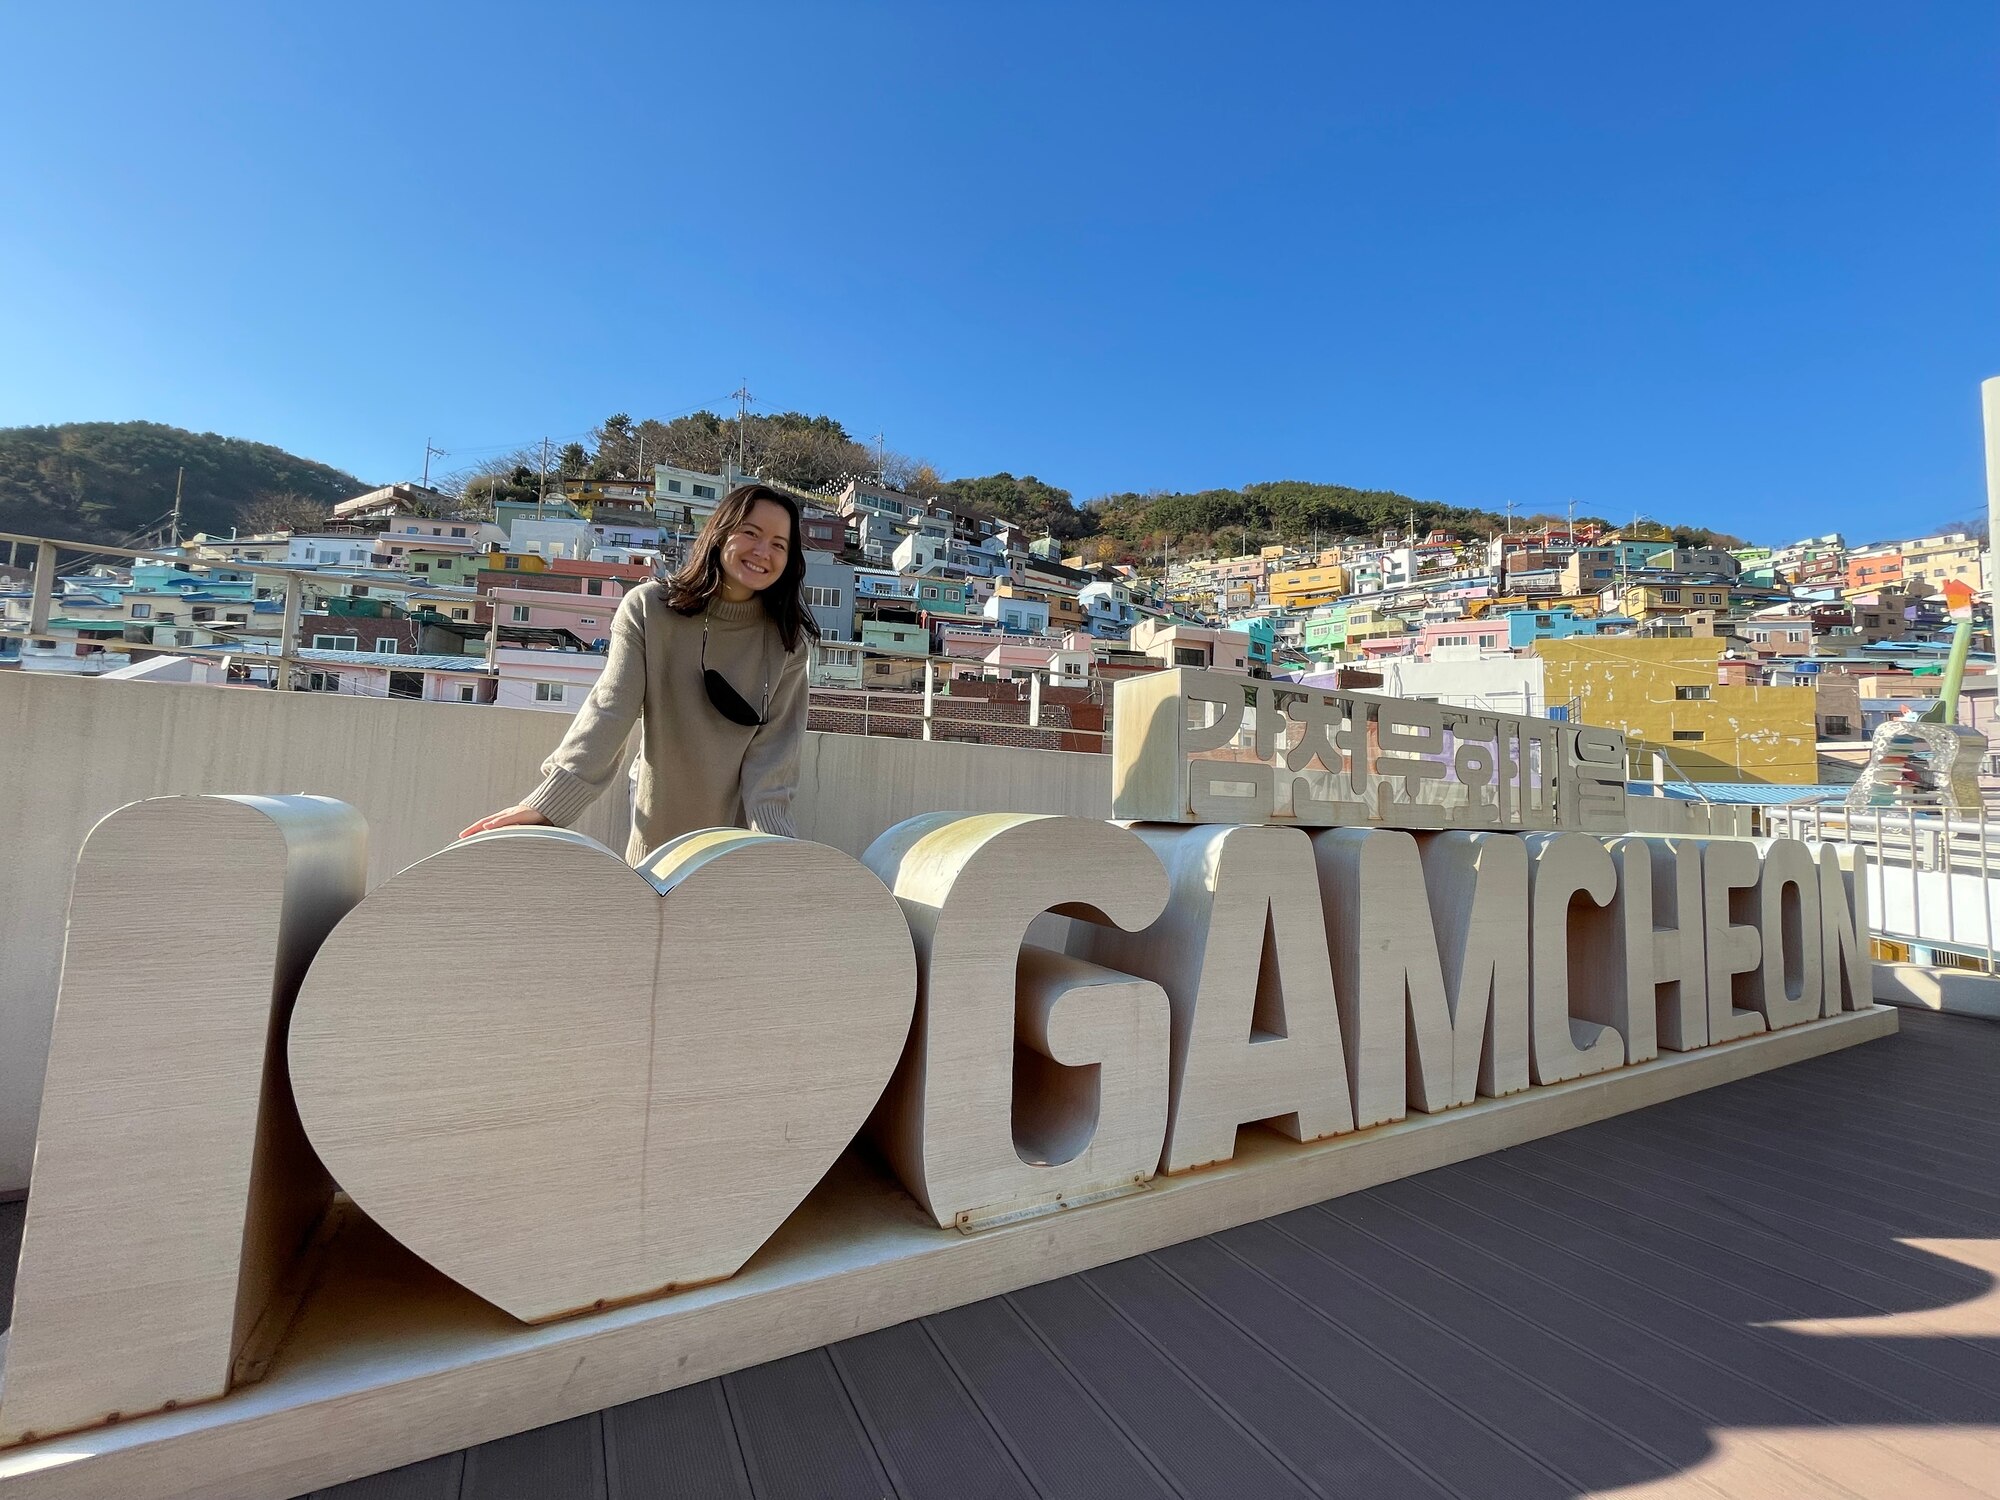 Abyy Fenn stands over a Gamcheon Village sign.